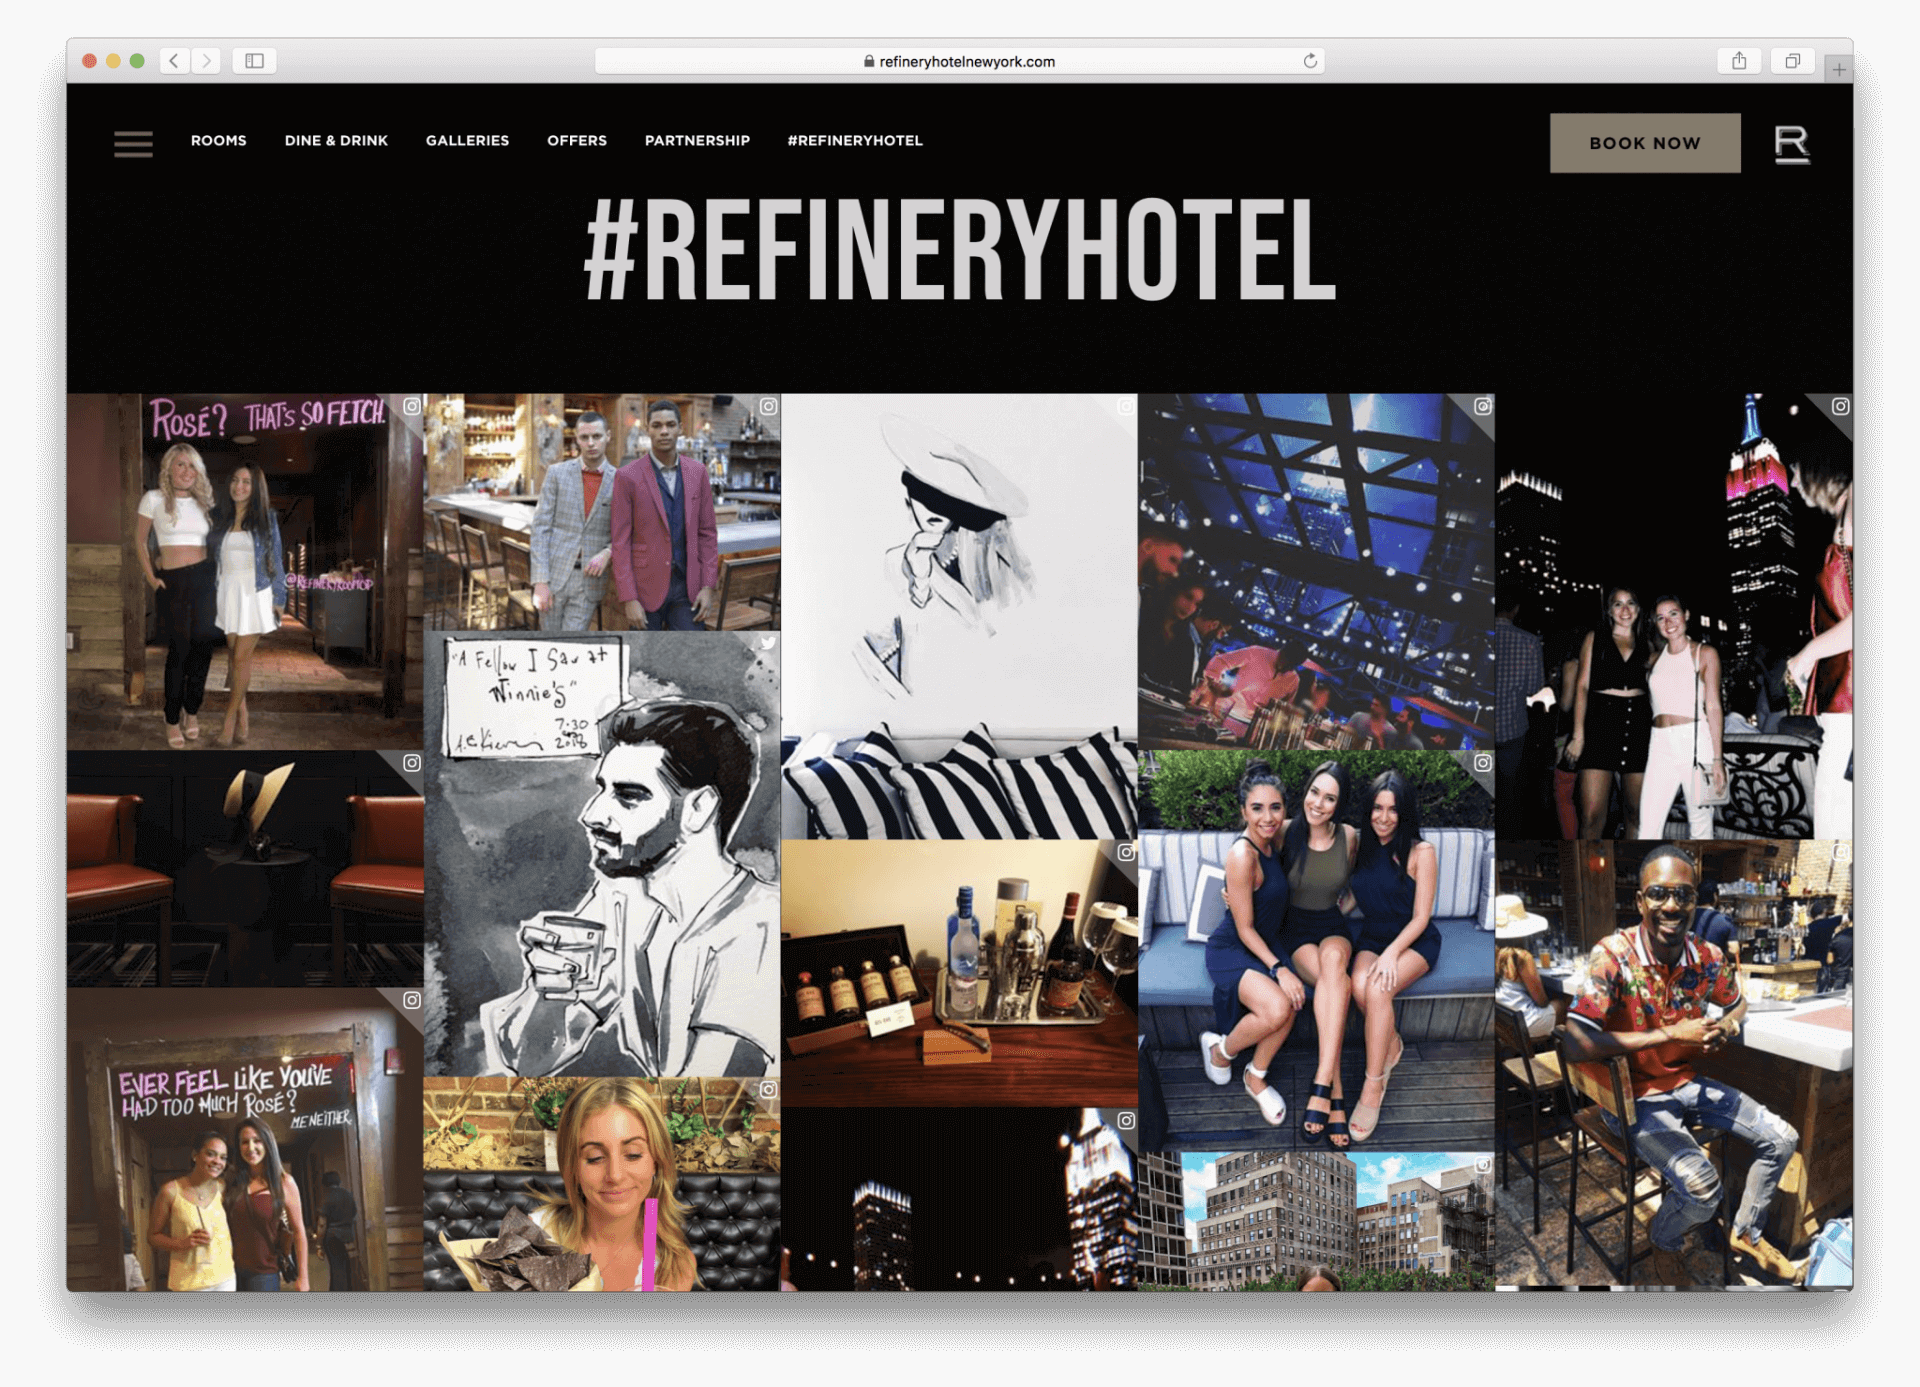 Online welcome page of The Refinery Hotels